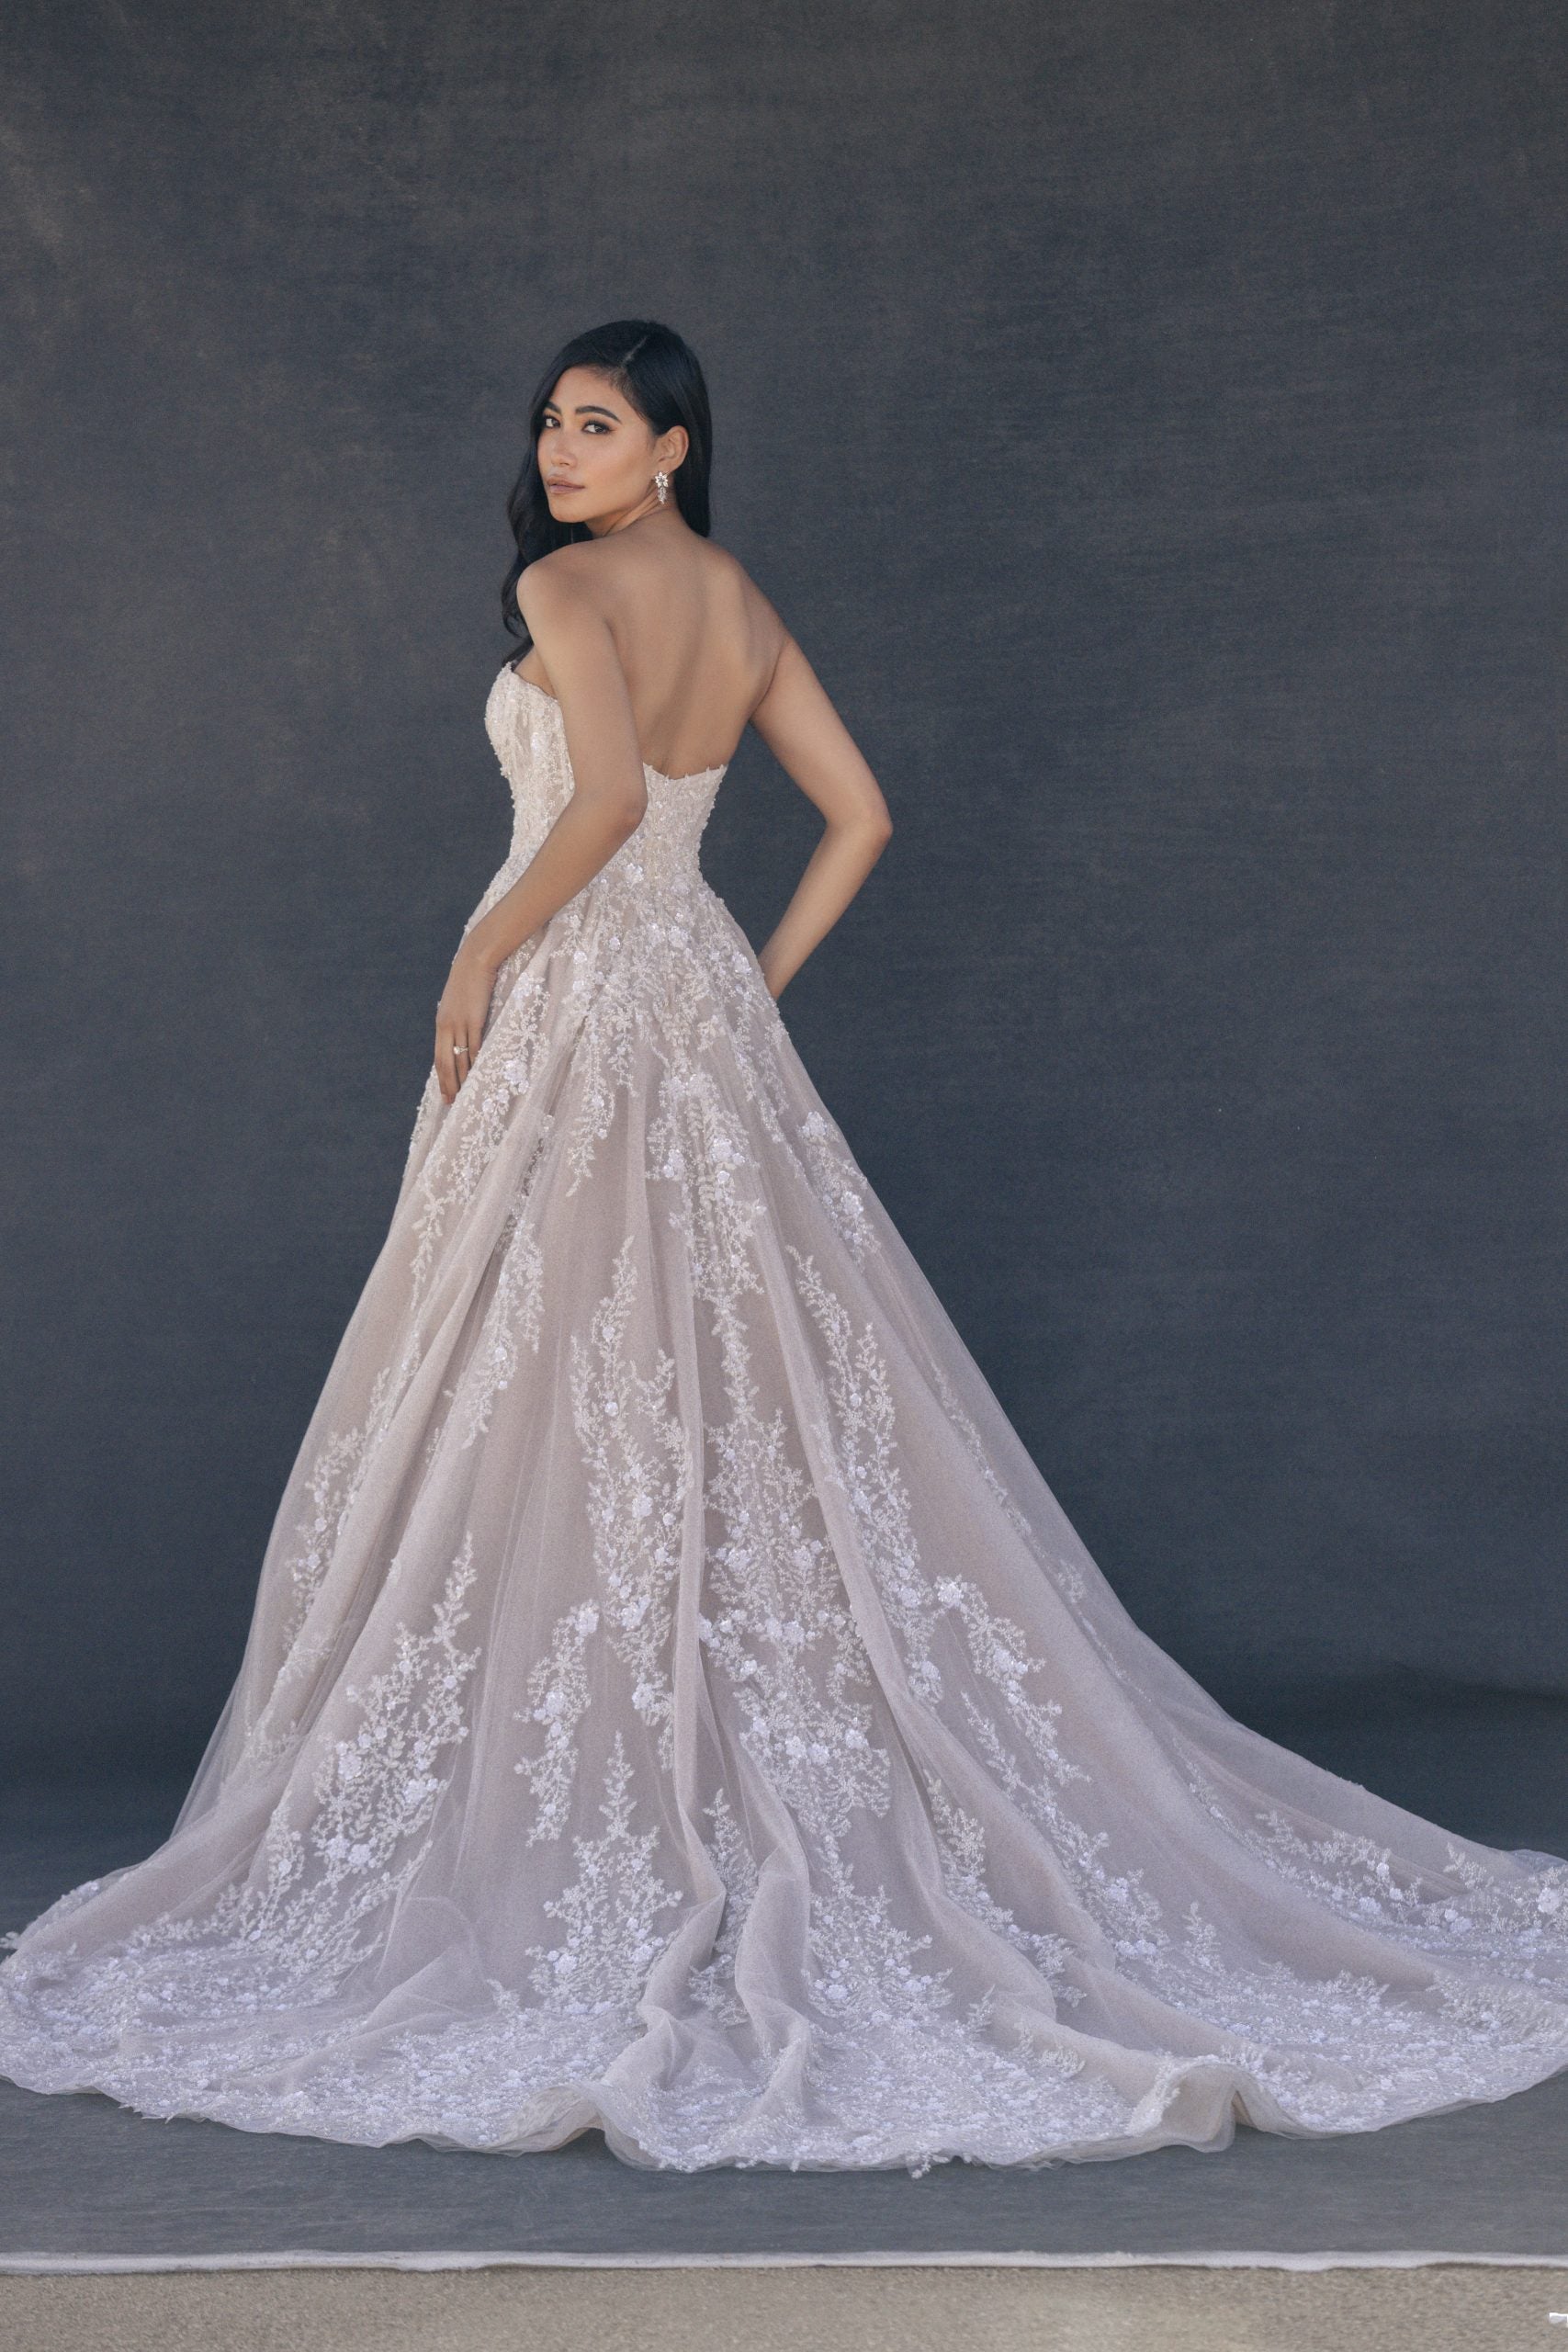 Corset A-Line Gown With Nature-Inspired Beading by Allure Bridals - Image 2